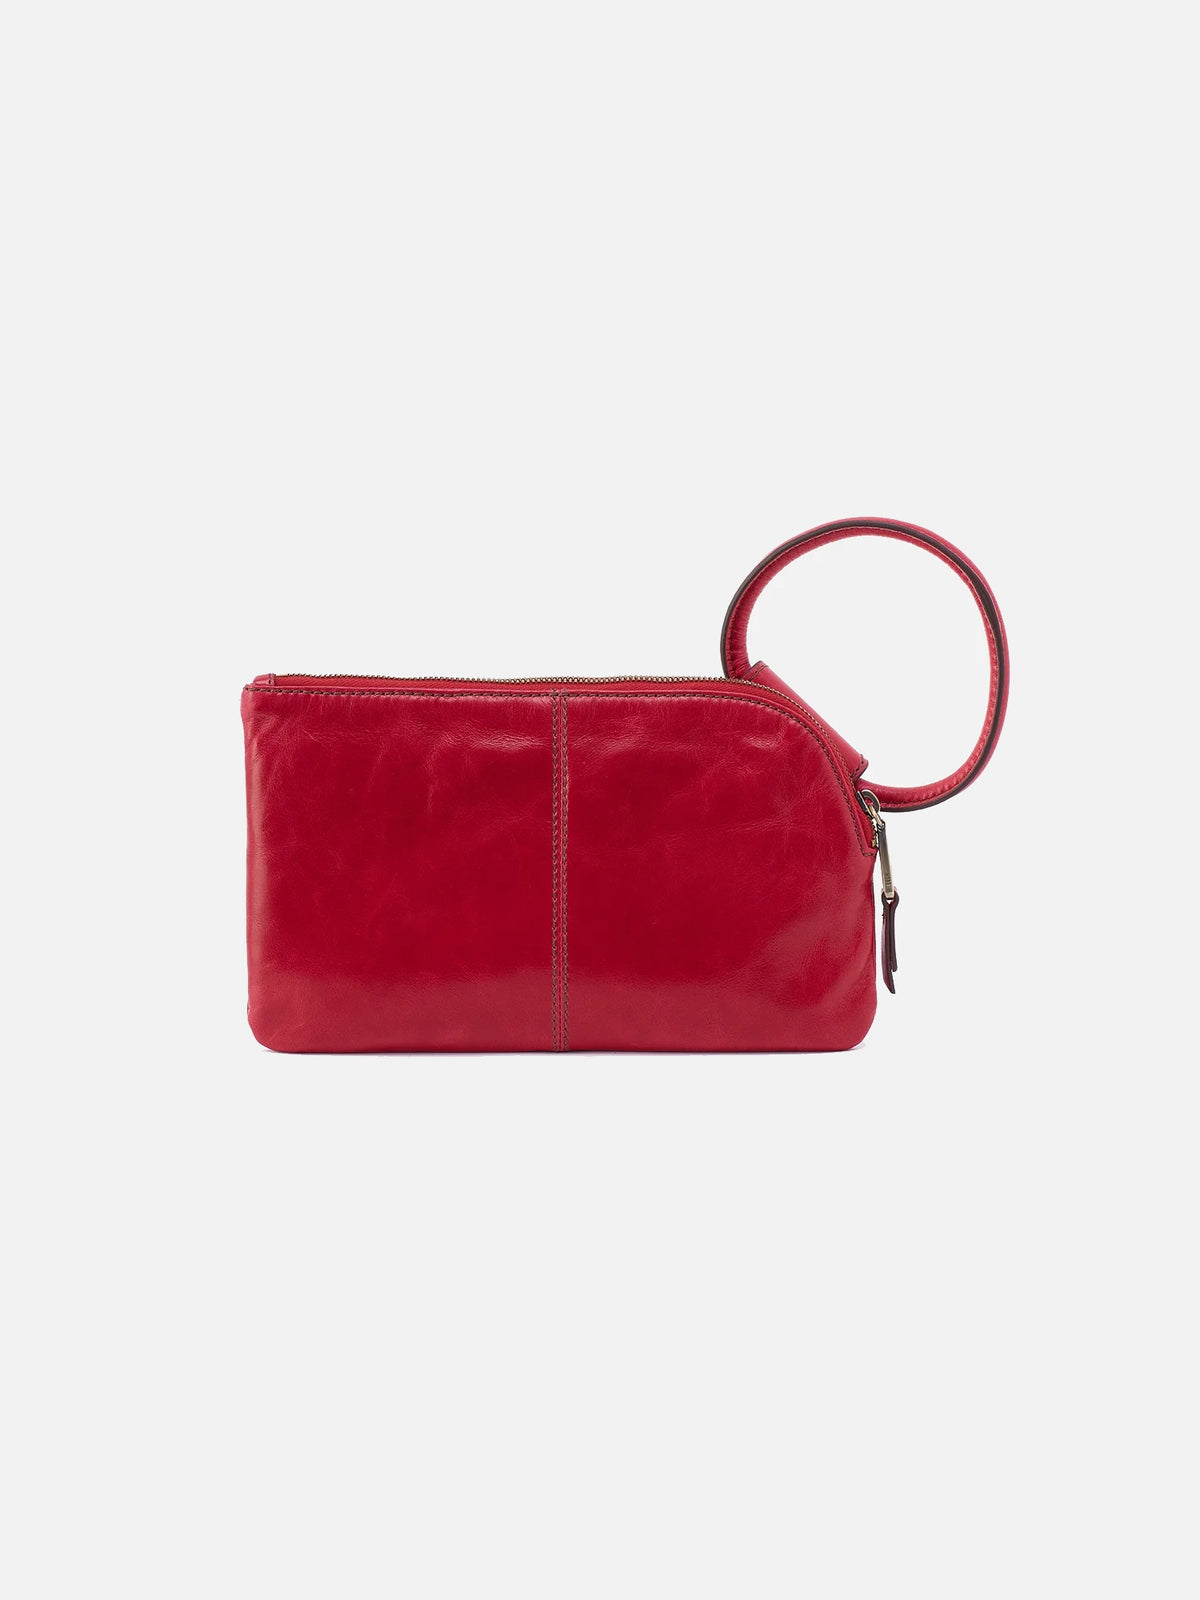 hobo sable wristlet in claret red polished leather